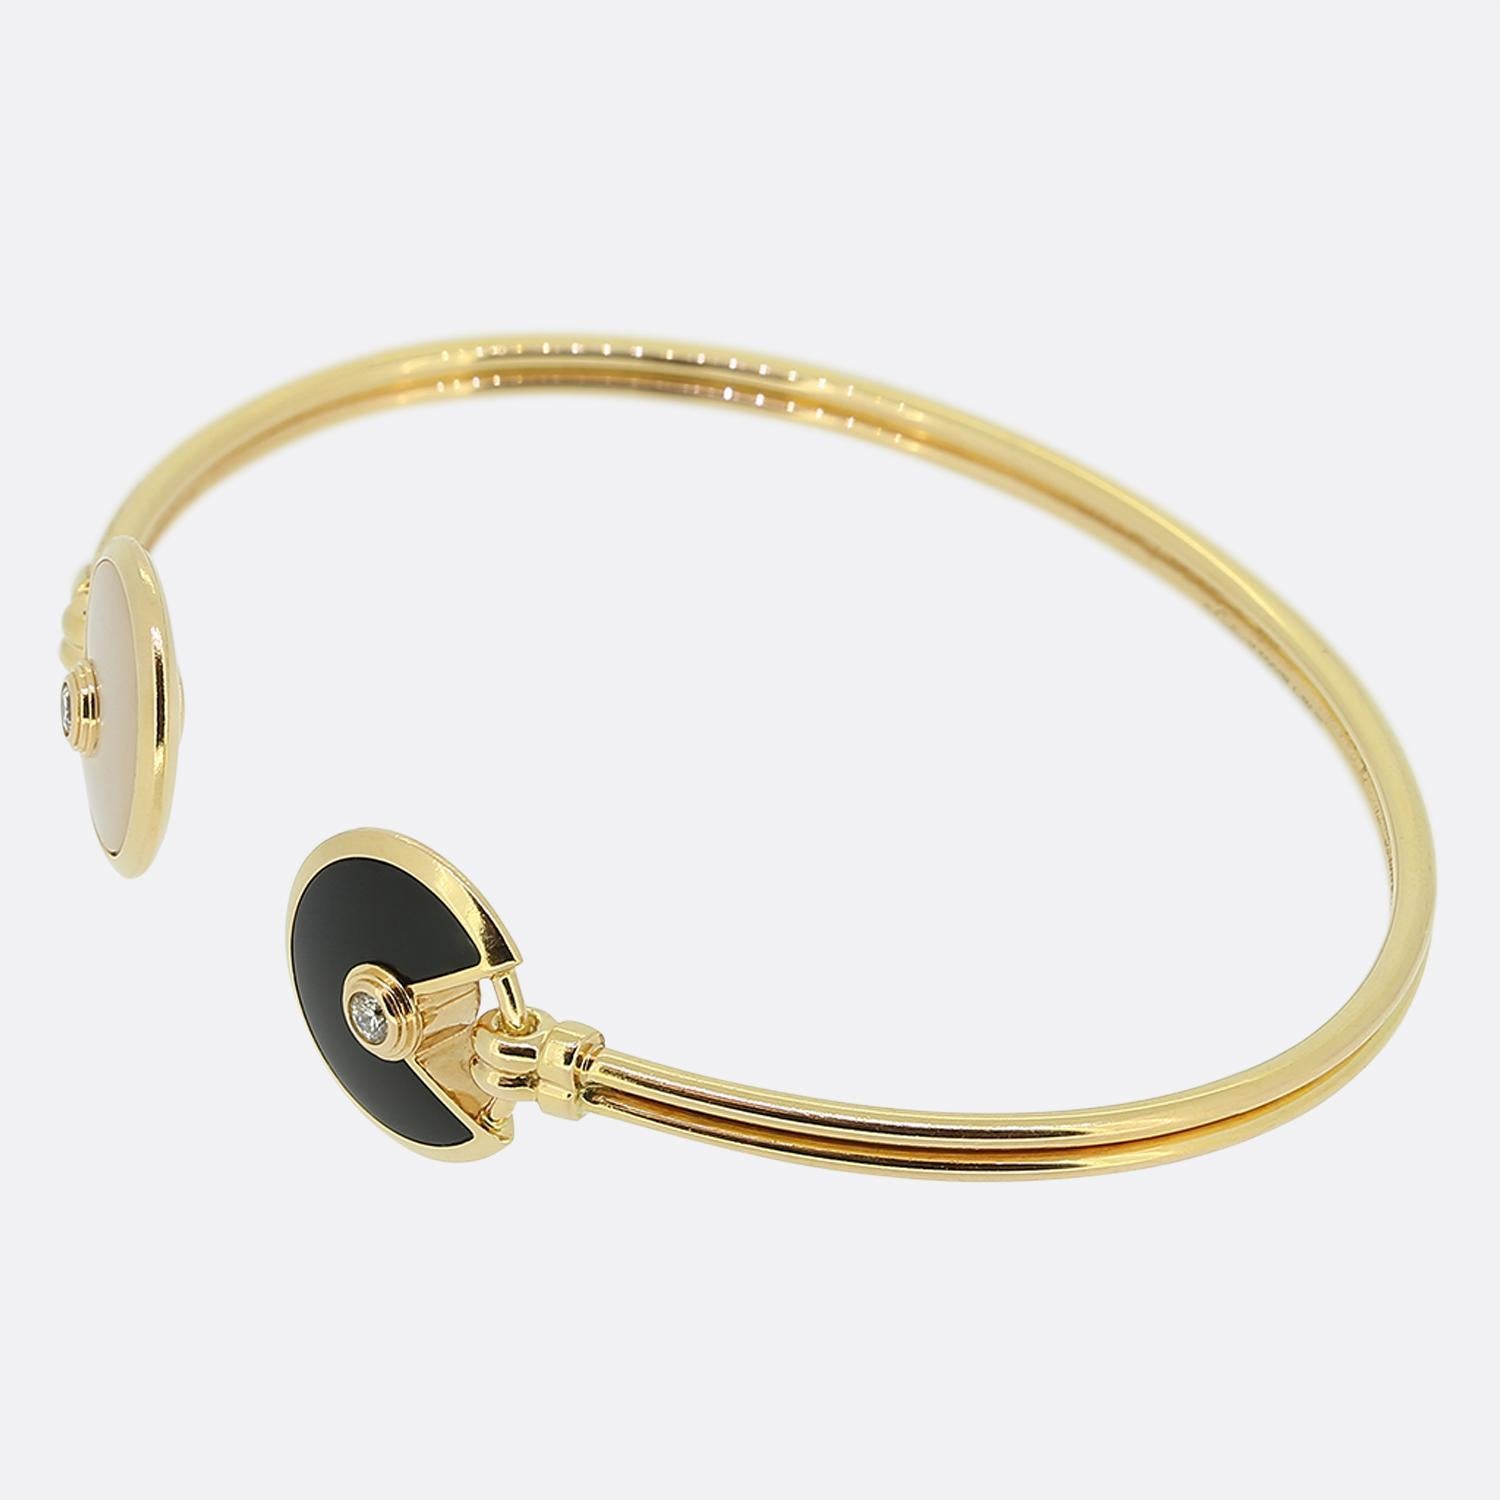 Here we have a fabulous 18ct yellow gold bracelet from the world renowned luxury jewellery house of Cartier. The piece forms part their Amulette de Cartier collection and showcases an open cuff style with iconic motif in onyx at one end and Mother